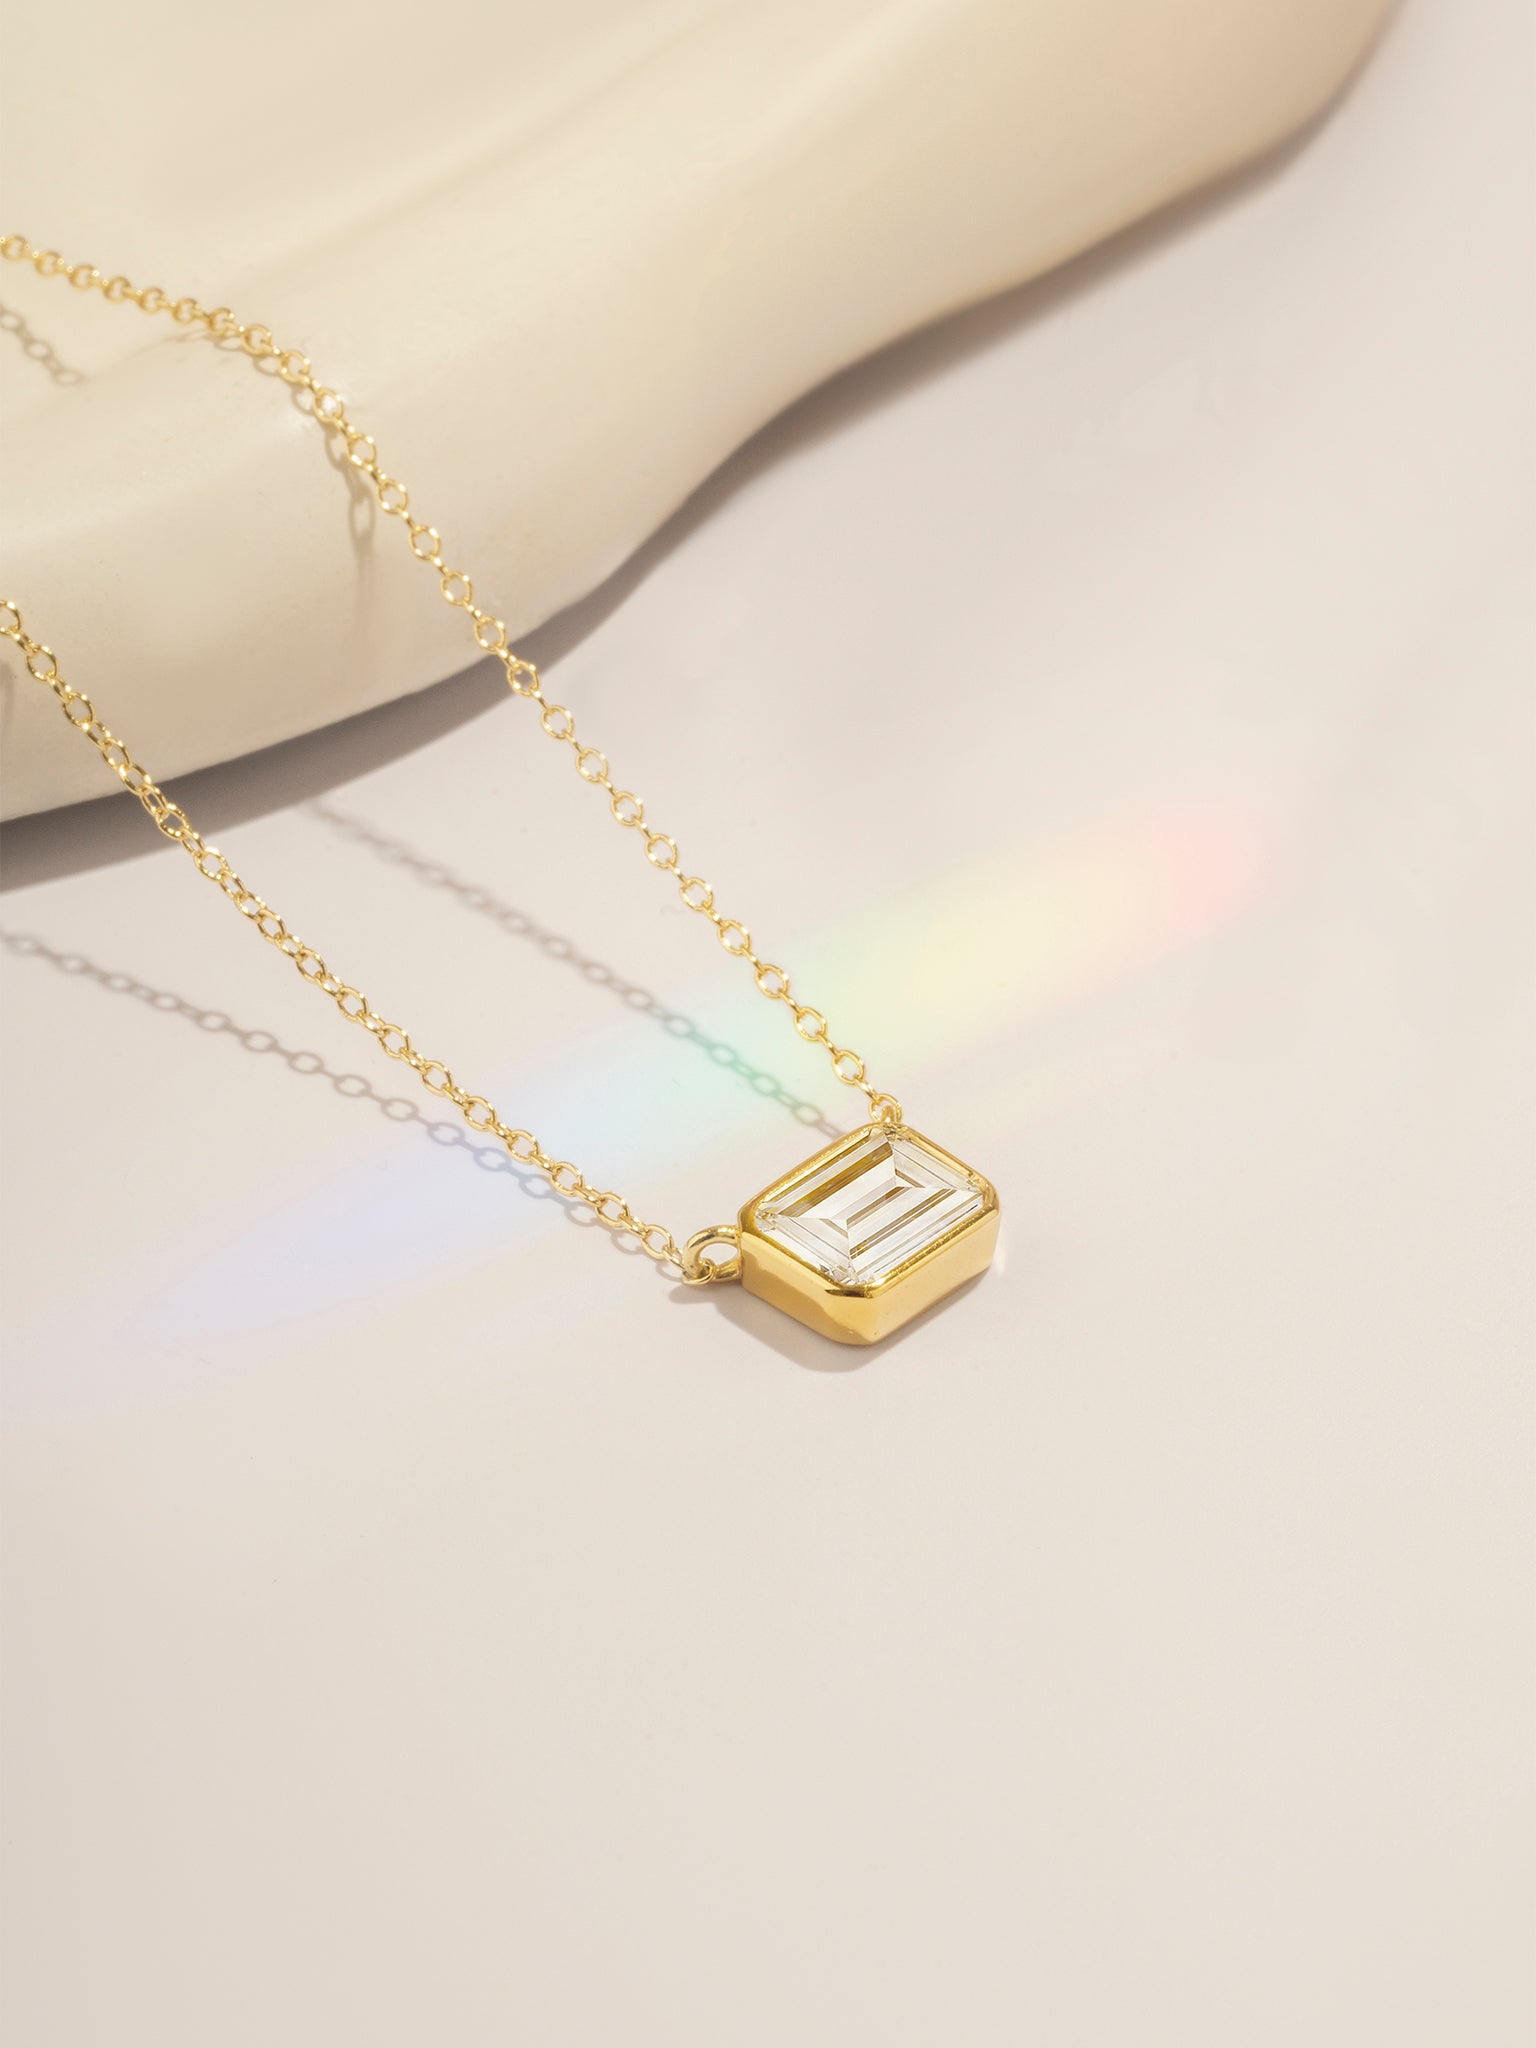 Tender Objects New Light Necklace - A chic and contemporary piece to elevate your style with modern elegance.